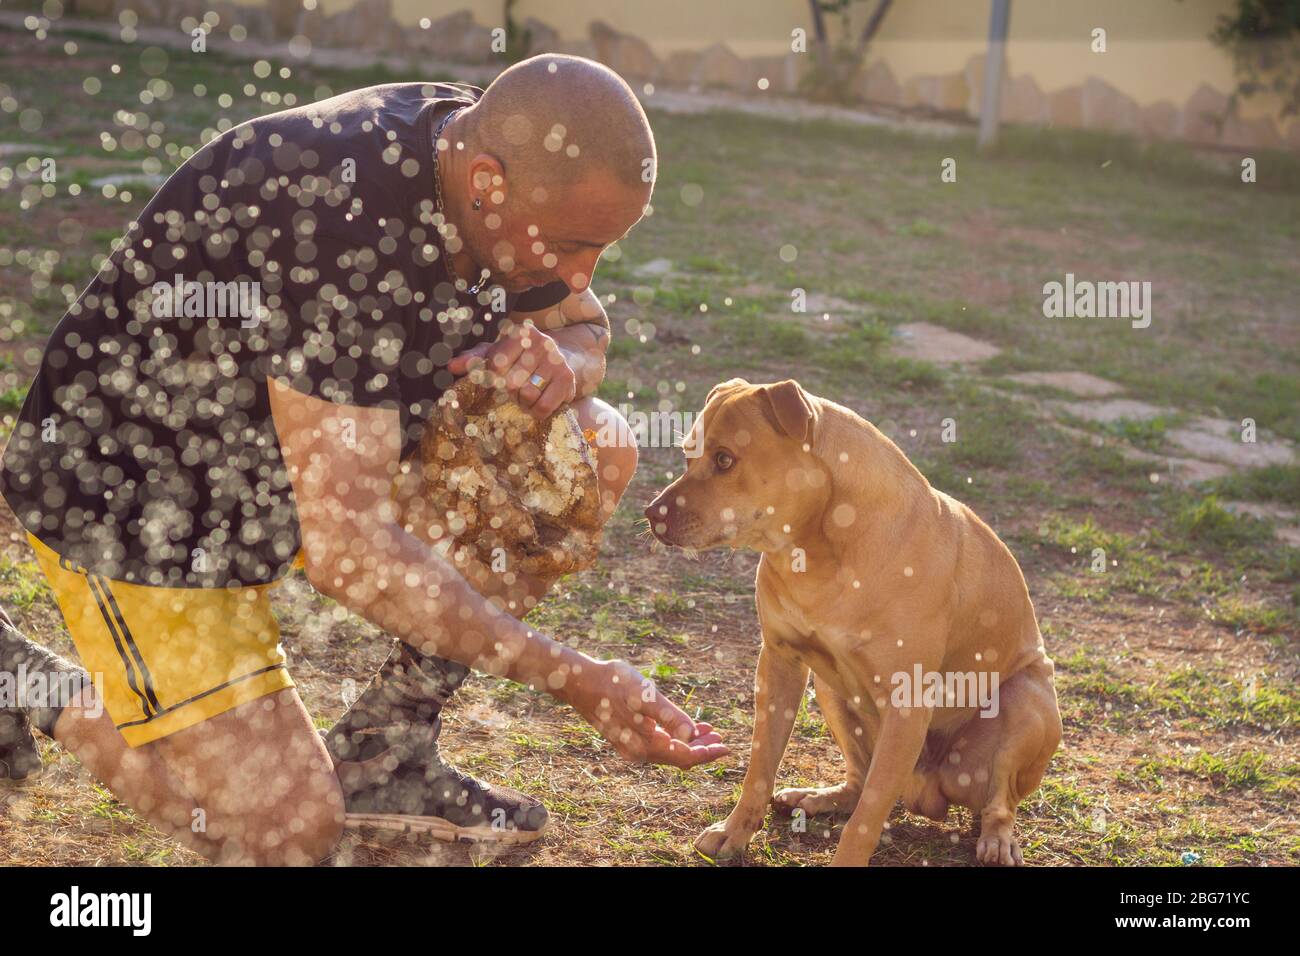 Man playing with dog in back yard Stock Photo